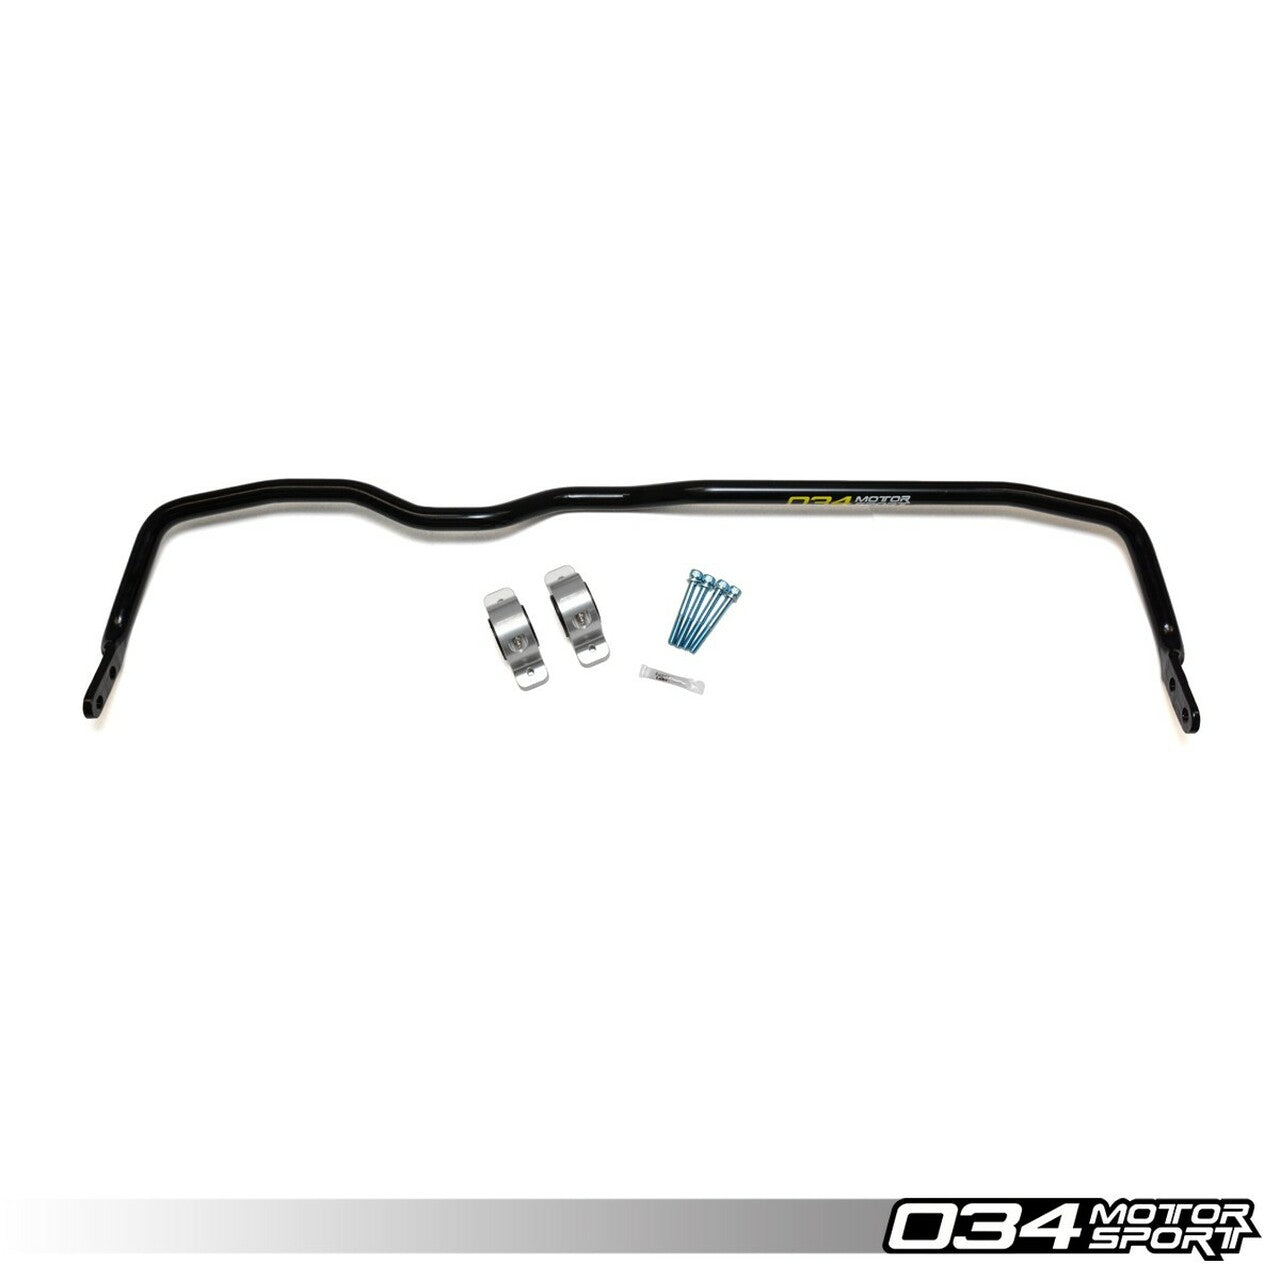 034Motorsport 23.8mm Front Sway bar for TT RS (8S) and RS3 (8V) - Wayside Performance